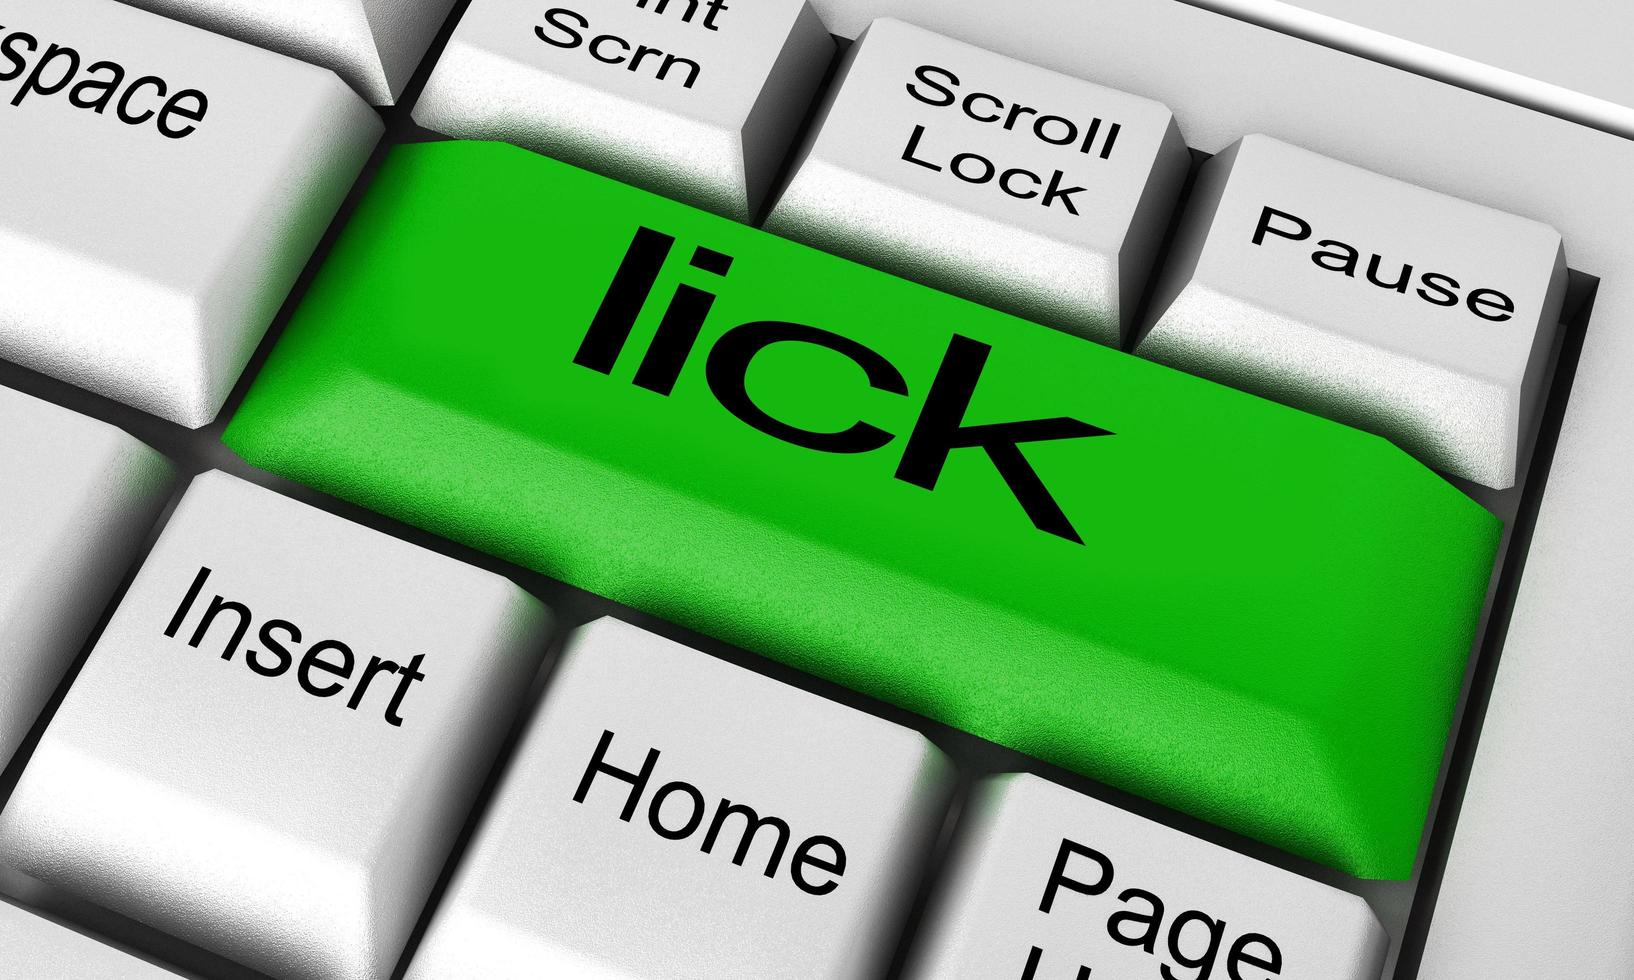 lick word on keyboard button photo